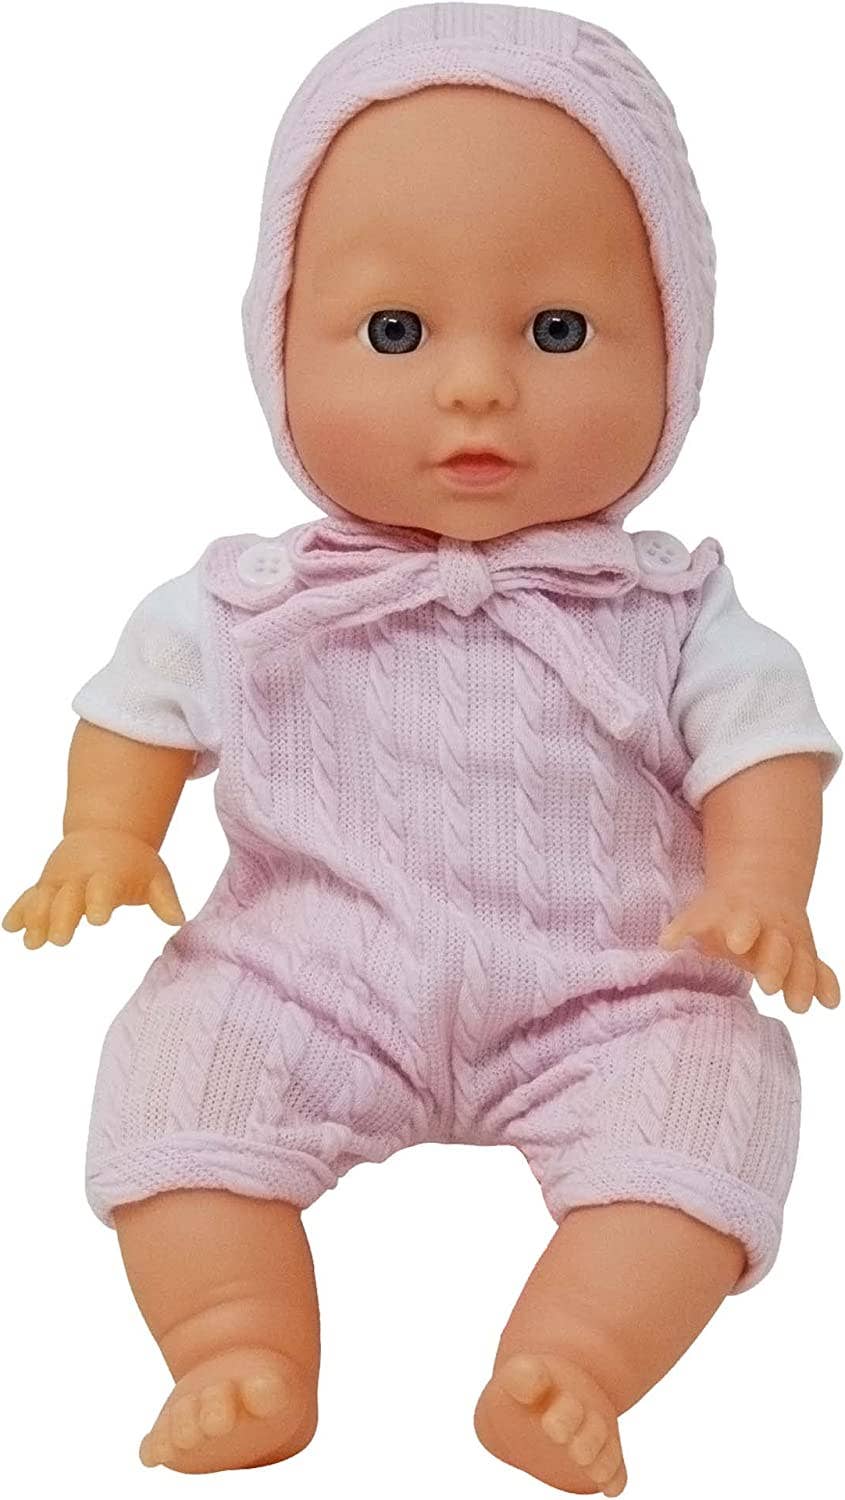 Purchase Wholesale soft baby dolls. Free Returns & Net 60 Terms on